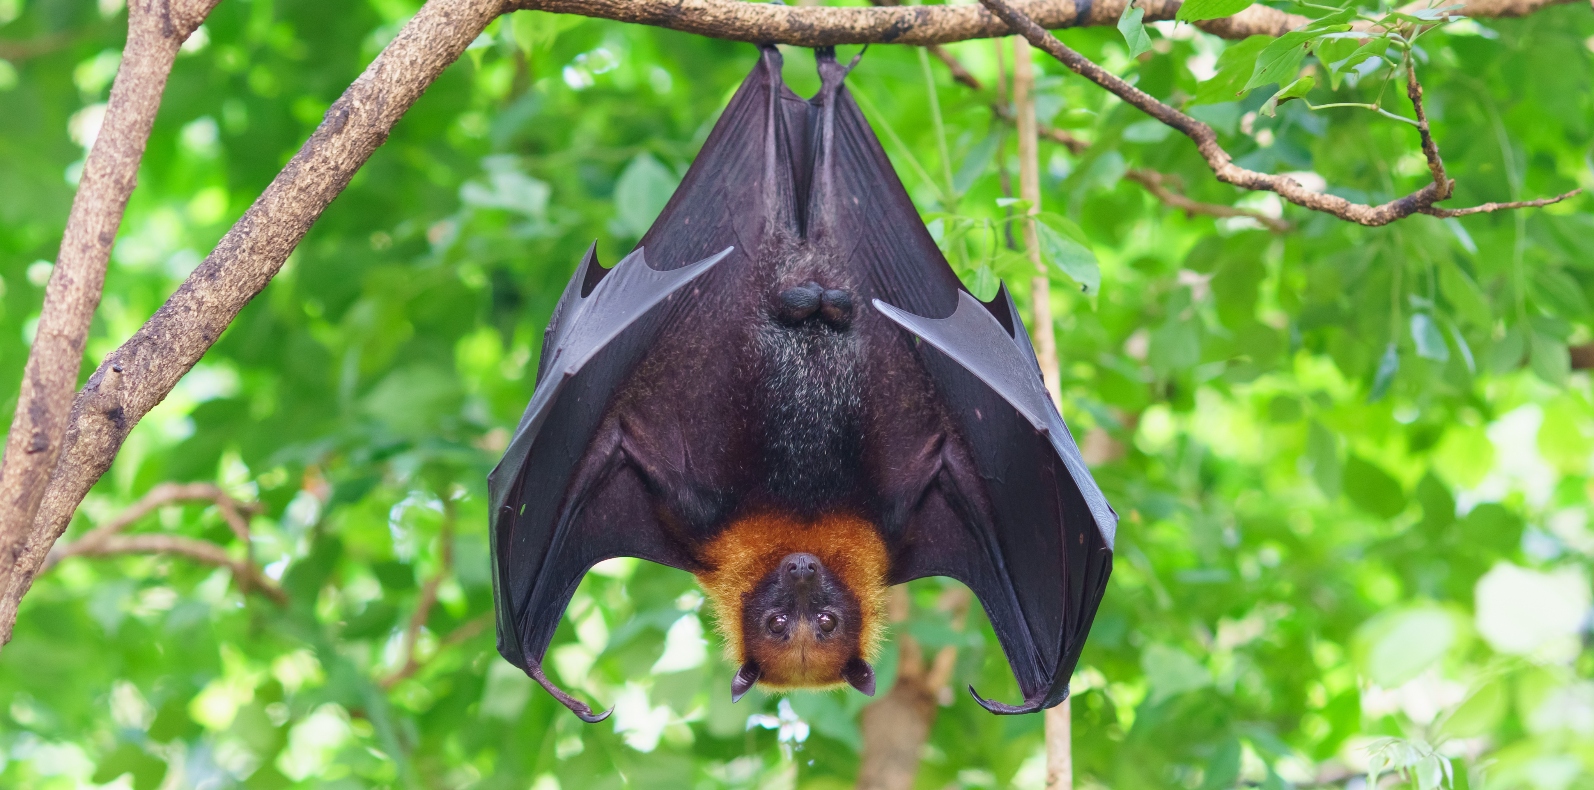 Flying foxes are driving Sydney residents batty